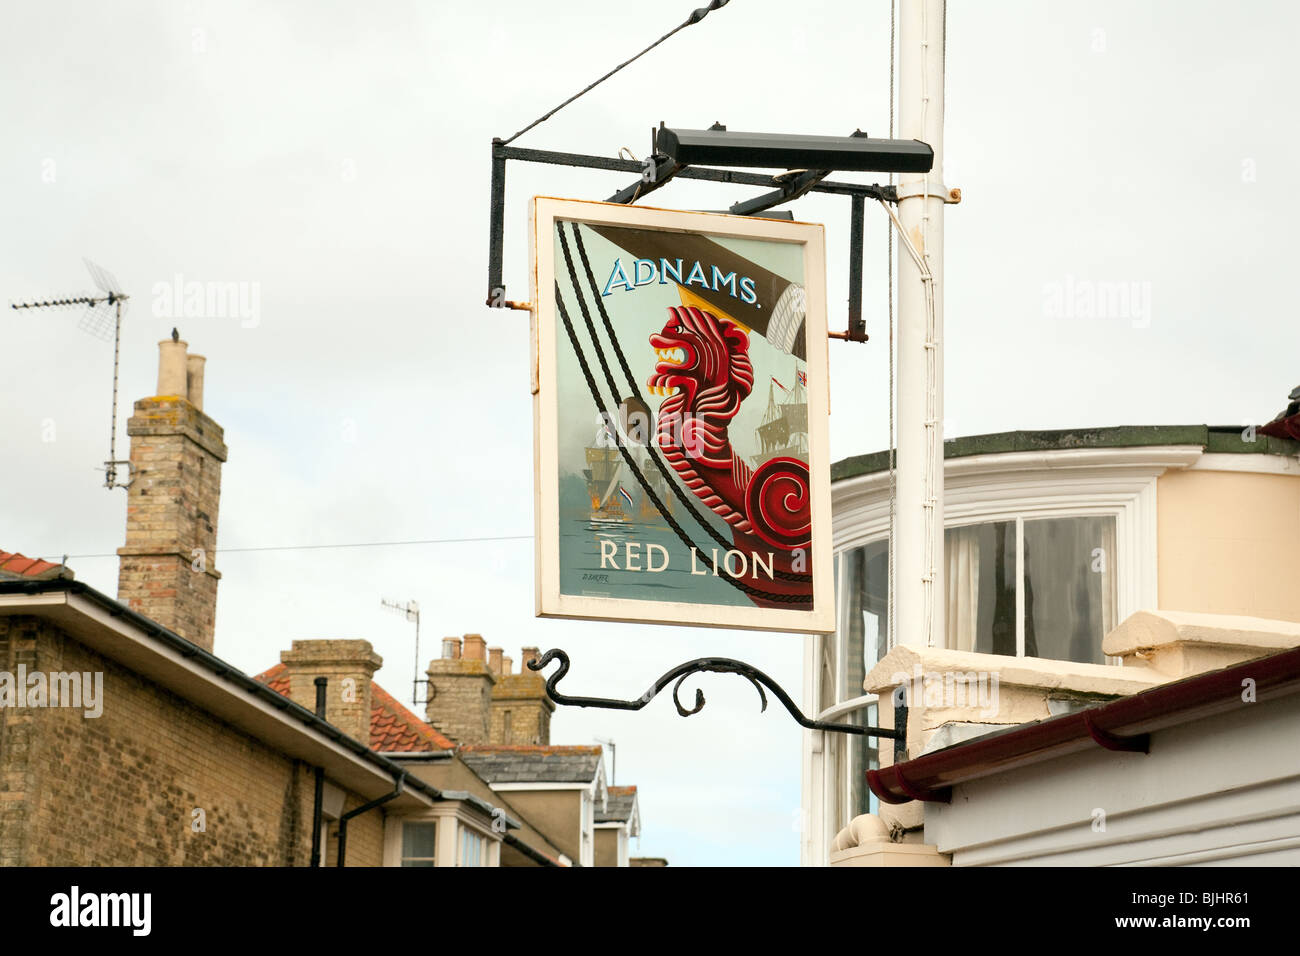 The Red Lion pub sign, Southwold, Suffolk, UK Stock Photo